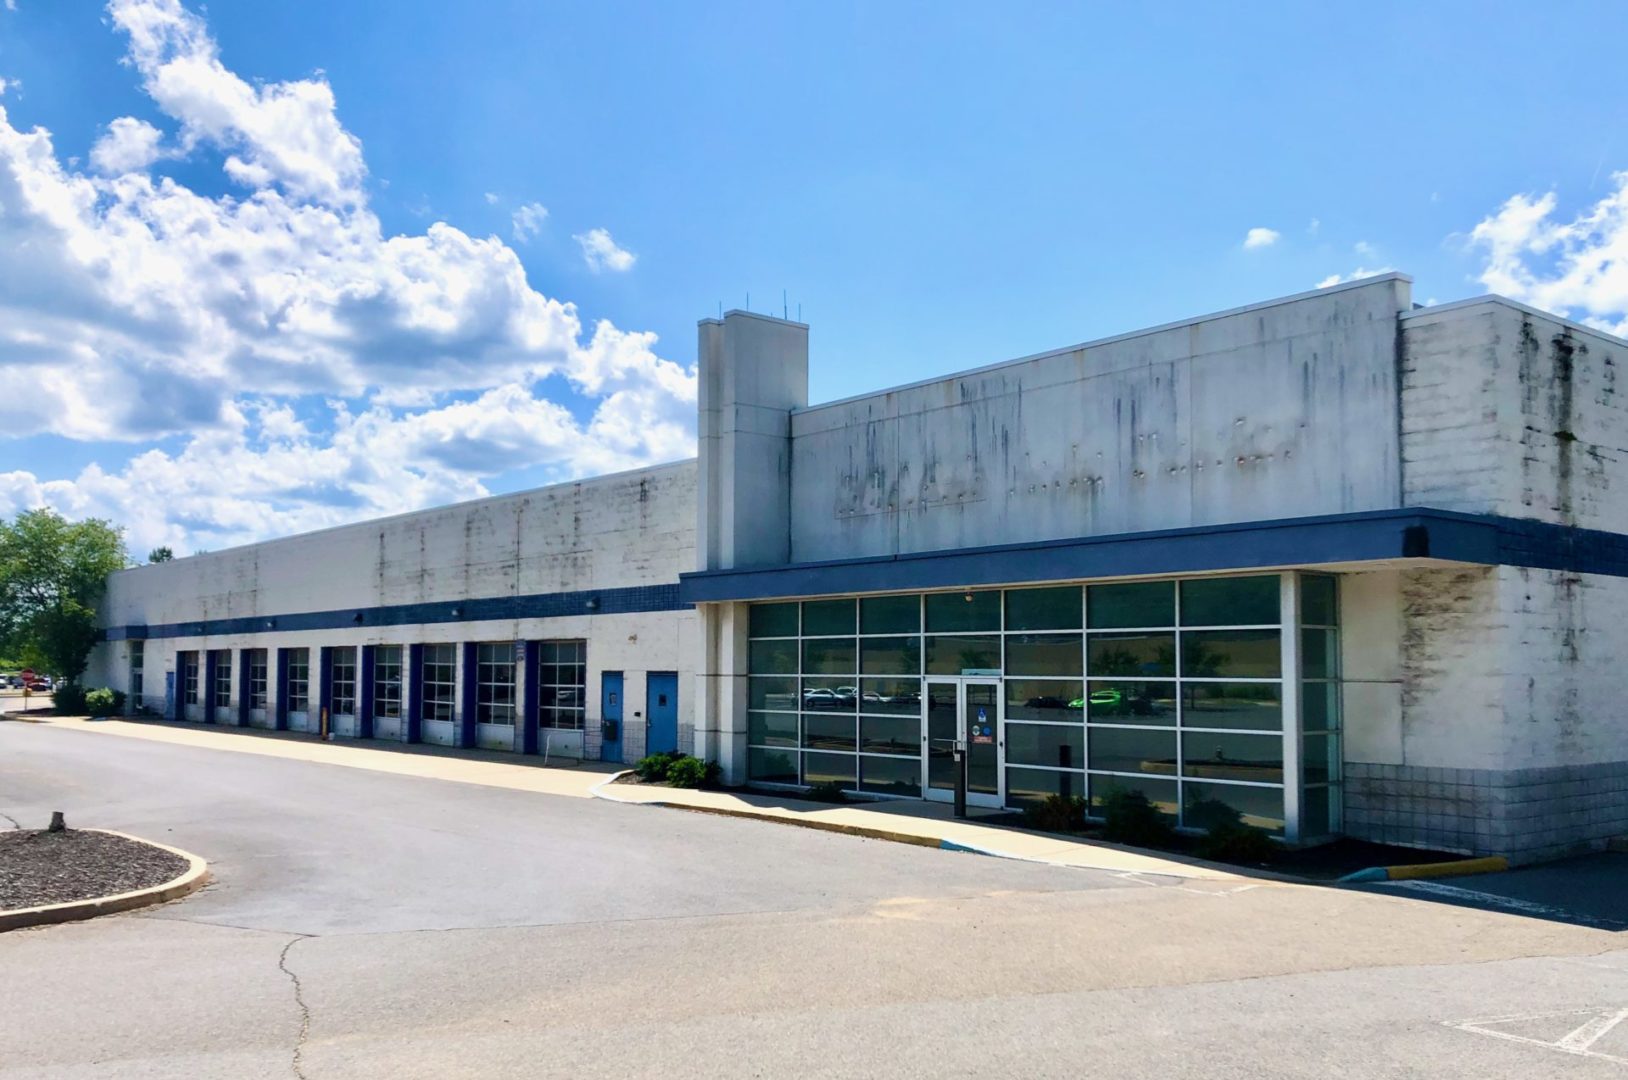 Regional Tire and Auto Repair Chain Looking to Open in Former Sears Service Center